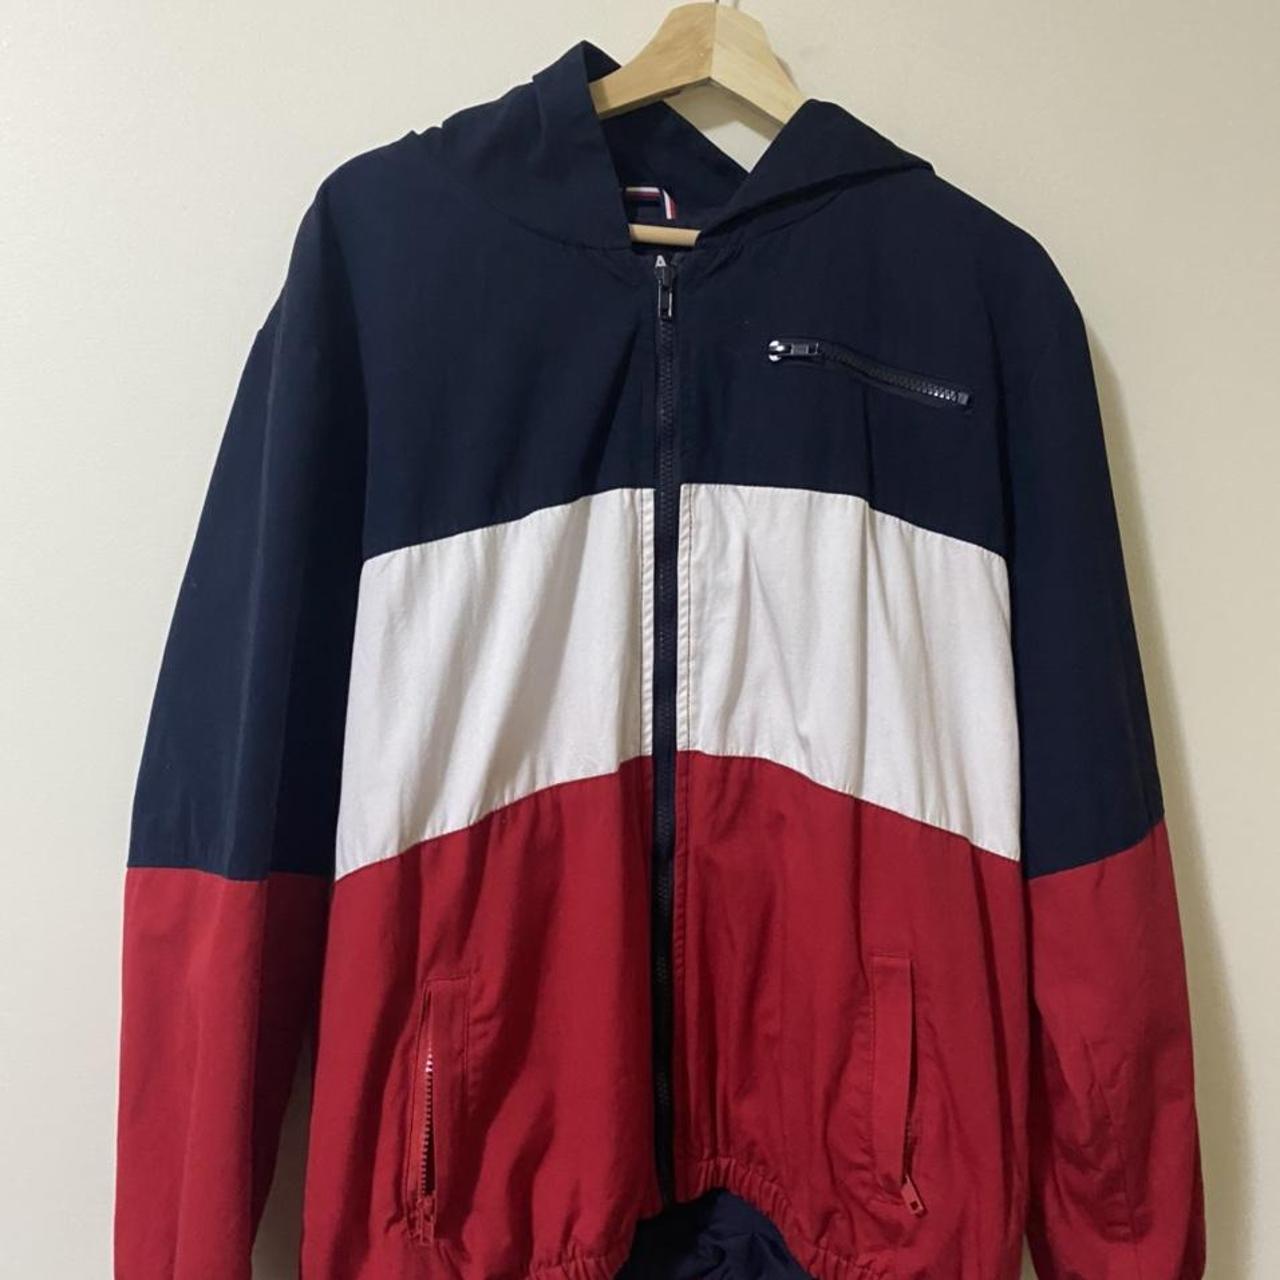 Women's Red and Blue Jacket | Depop